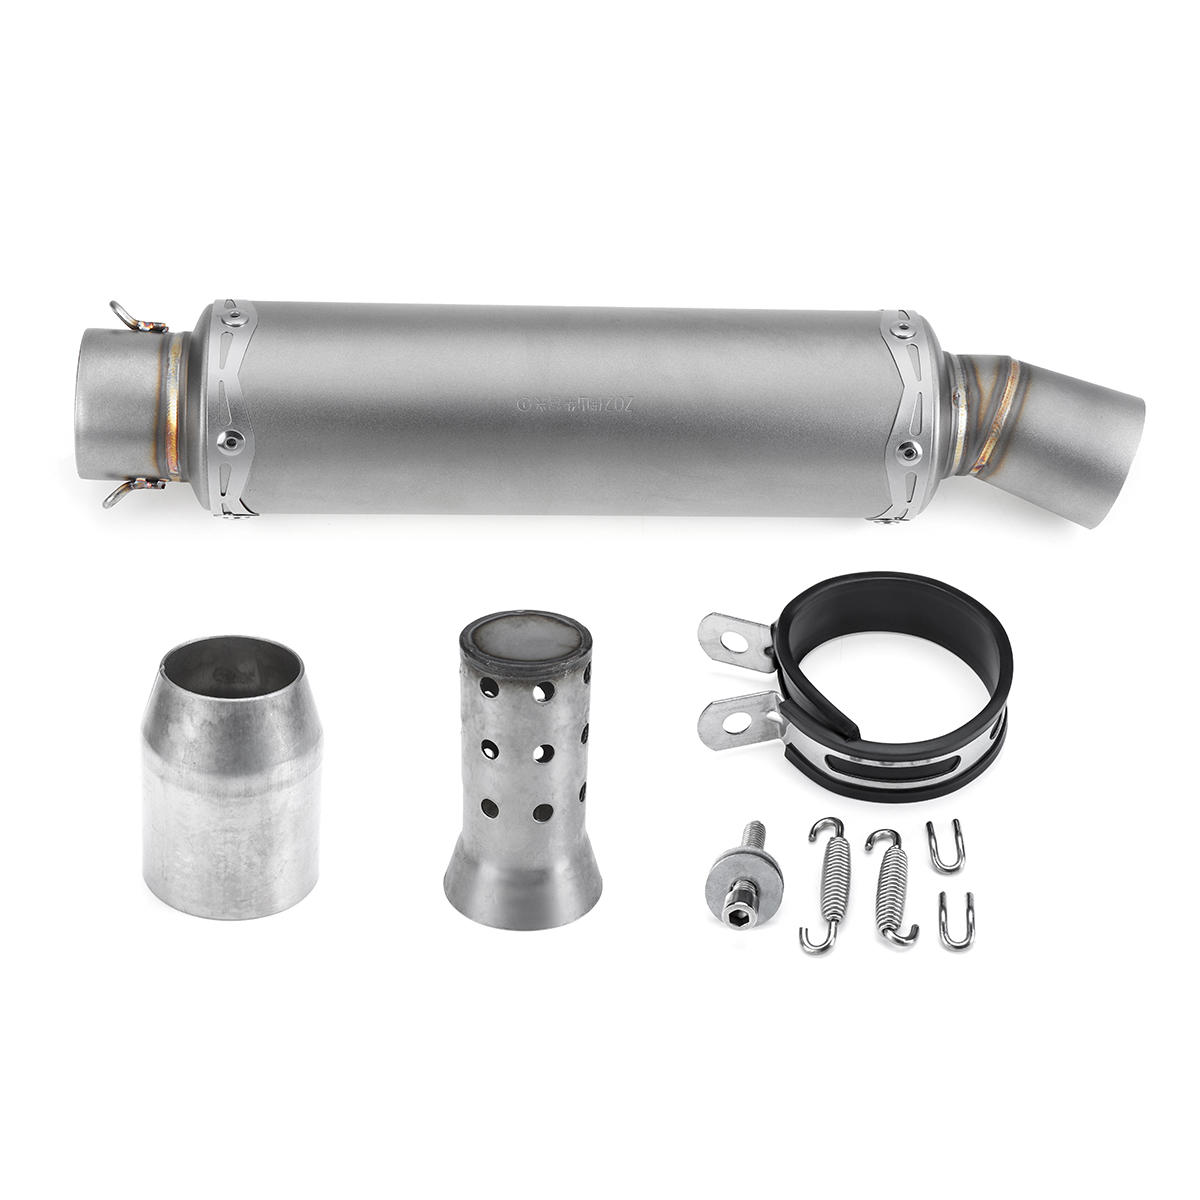 Inlet 36-51mm Motorcycle Exhaust Tail Tip Pipe Muffler Stainless Steel Modified Universal Titanium